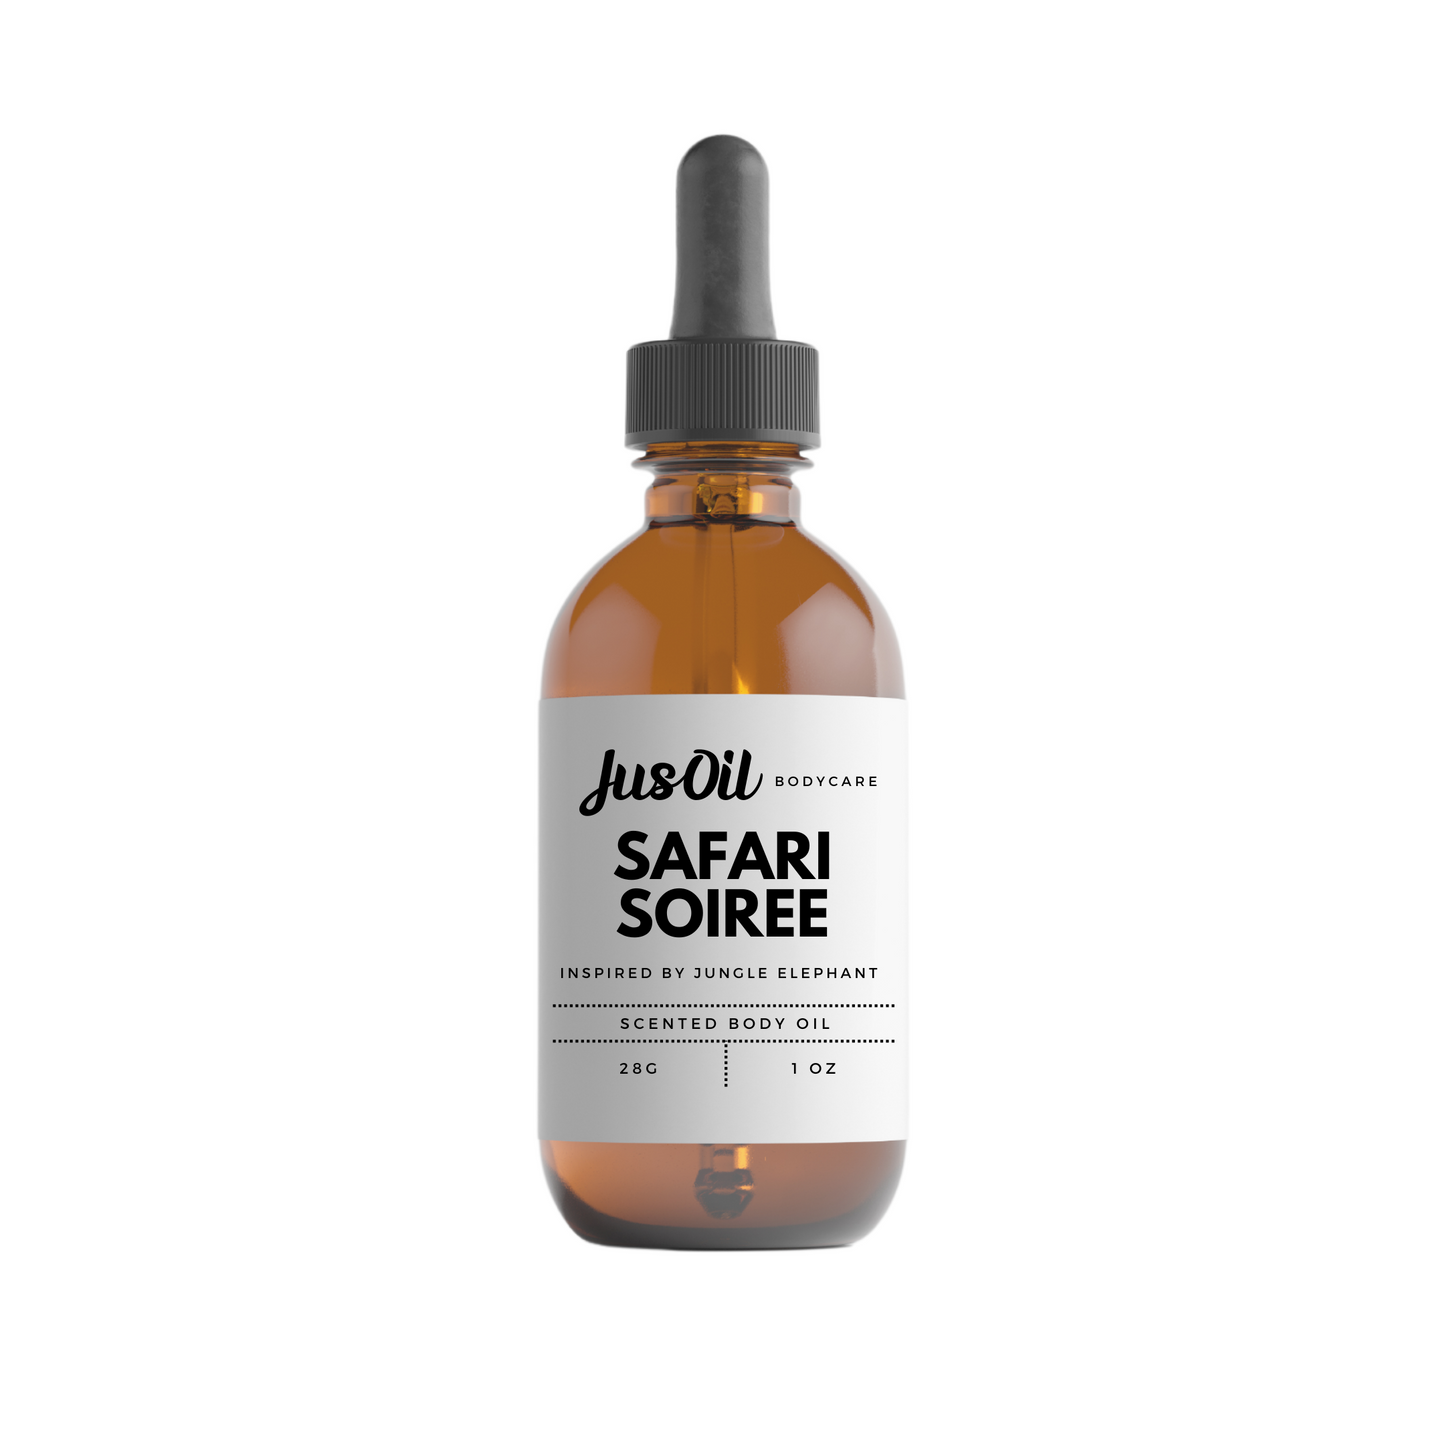 Safari Soiree Luxury Scented Body Oil - Inspired by Jungle Elephant - Hydrating & Long-Lasting